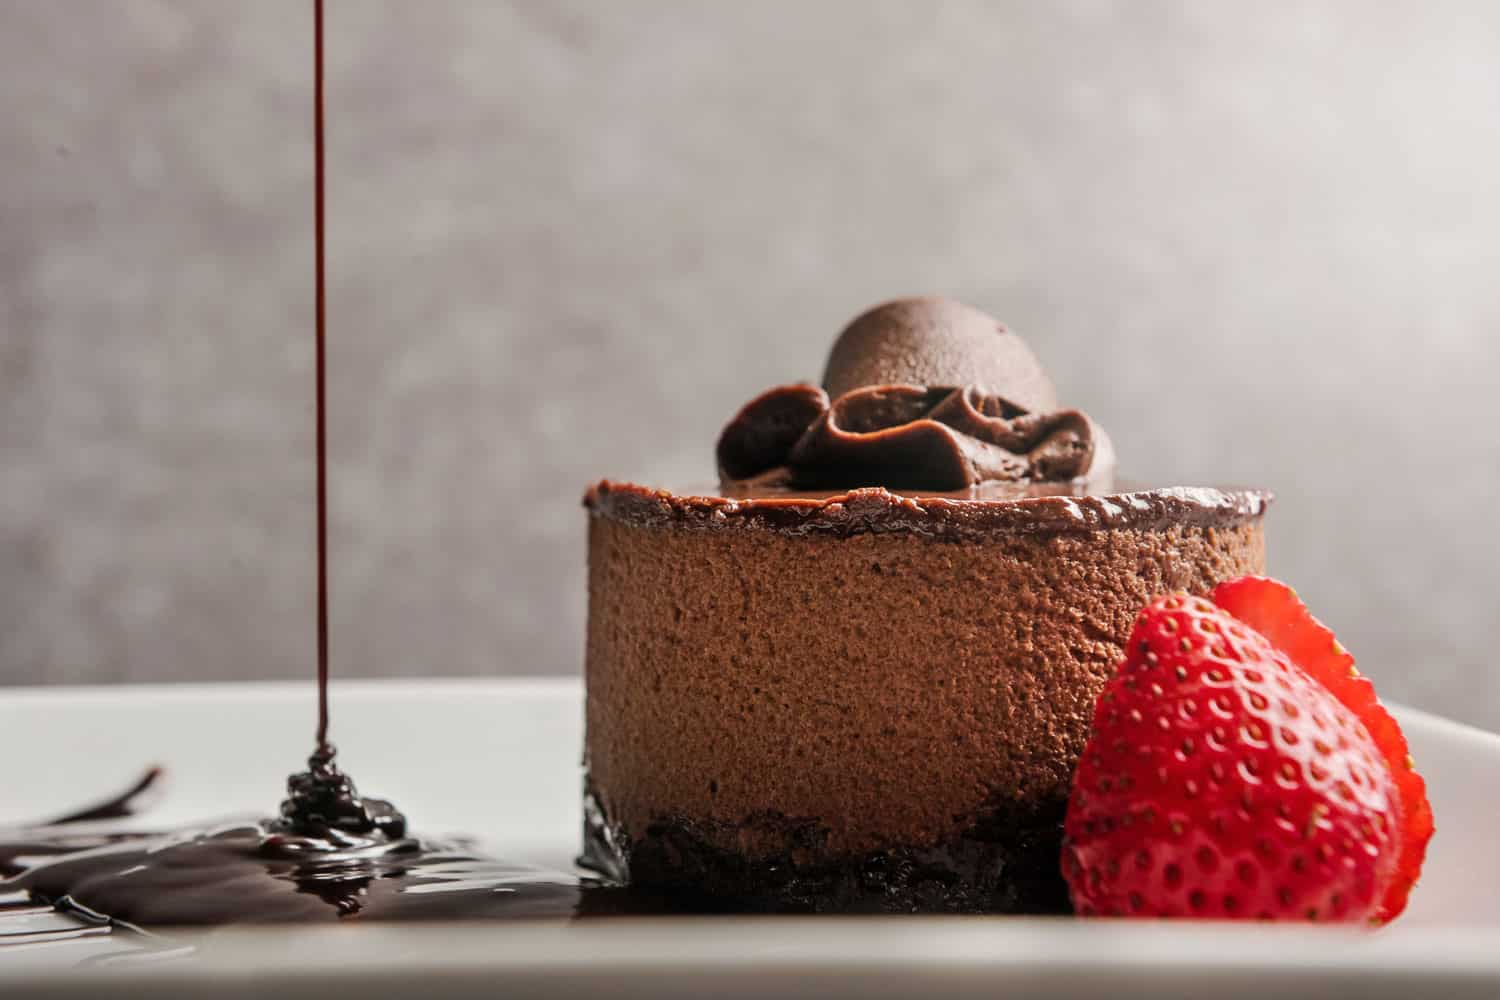 Chocolate mousse perfect for your desert